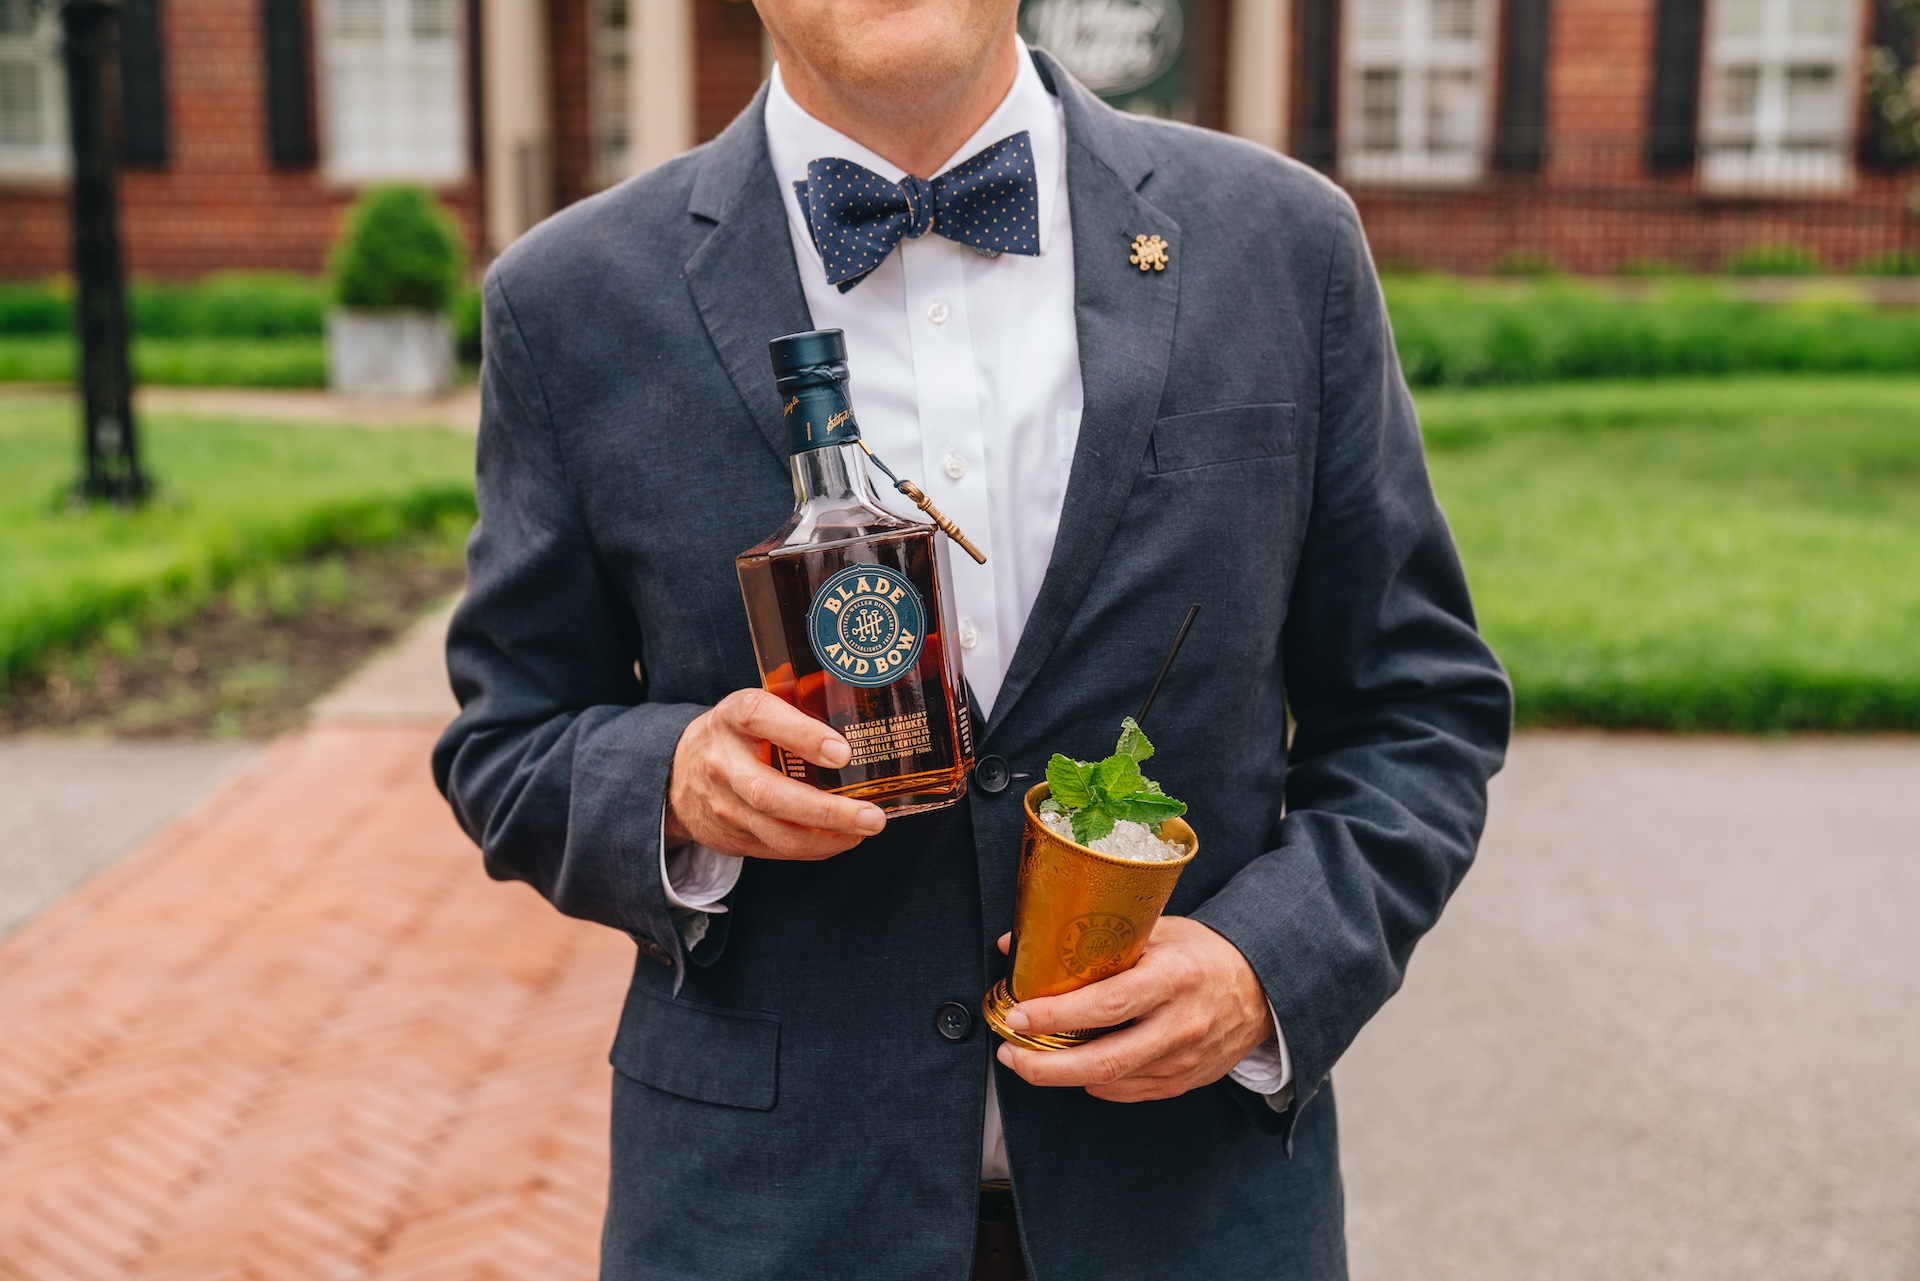 Man in a tuxedo holding a bottle of Blade and Bow whiskey and a brass cup. Out of focus in the background, a dog faces forward.